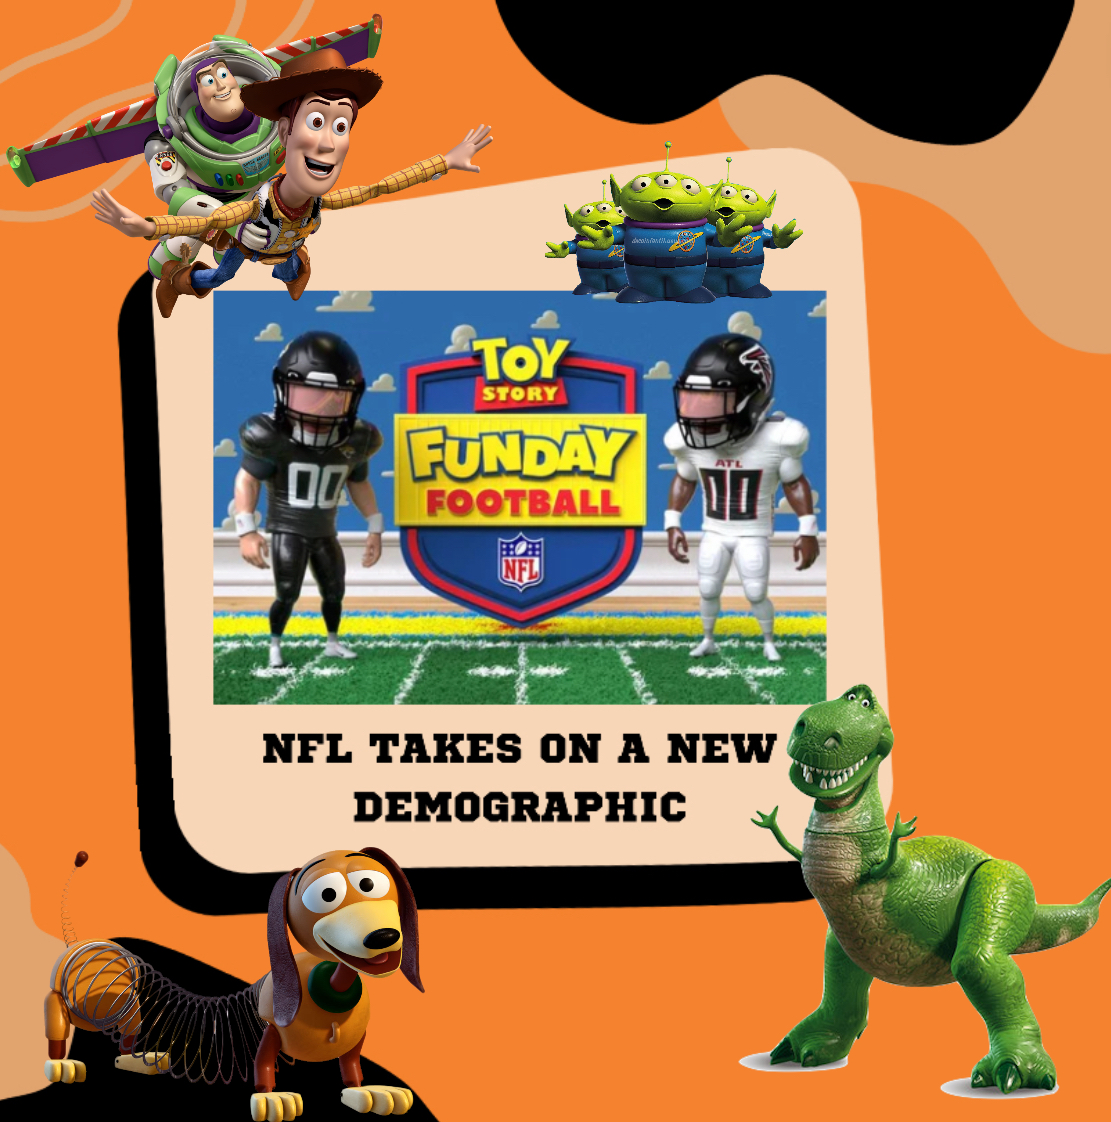 The+NFL+Takes+on+a+New+Demographic